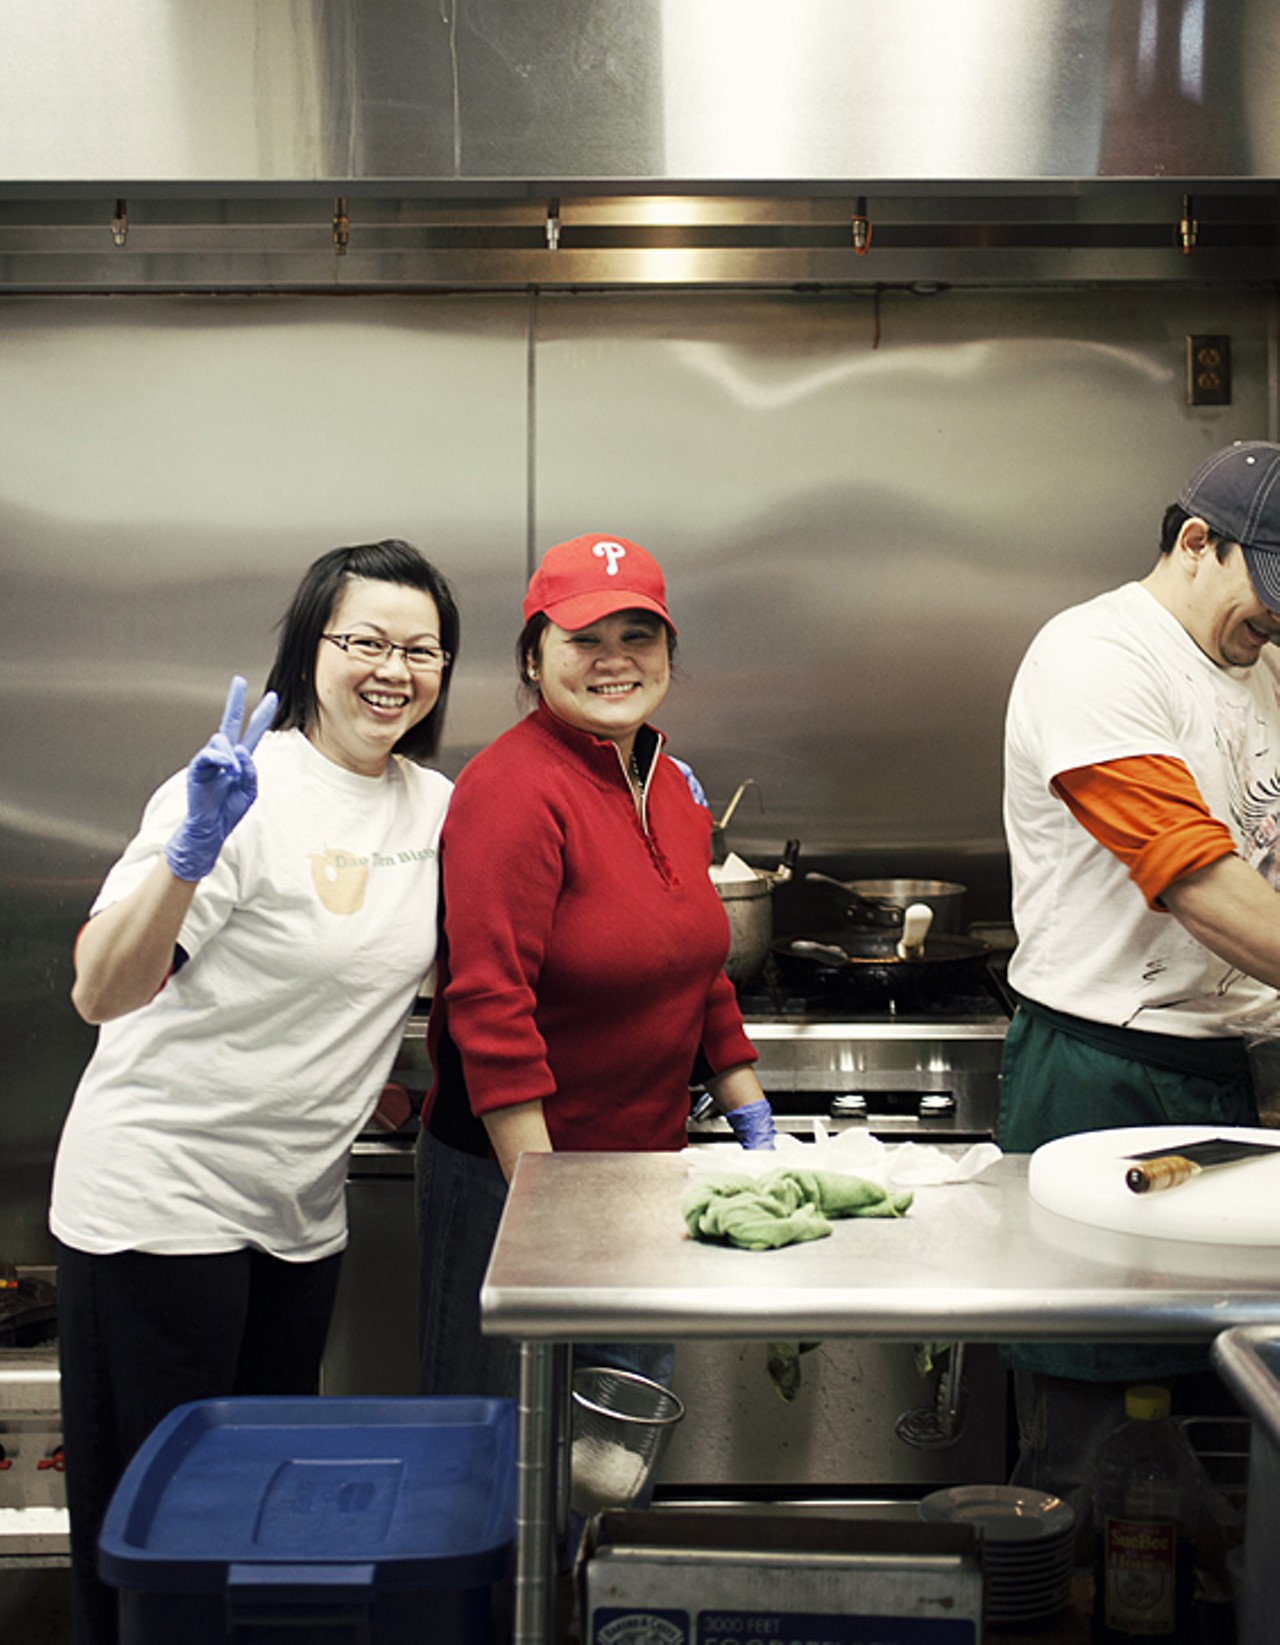 From left, owner and chef, Diane Bui with cook Suong Tran and another cook, David.